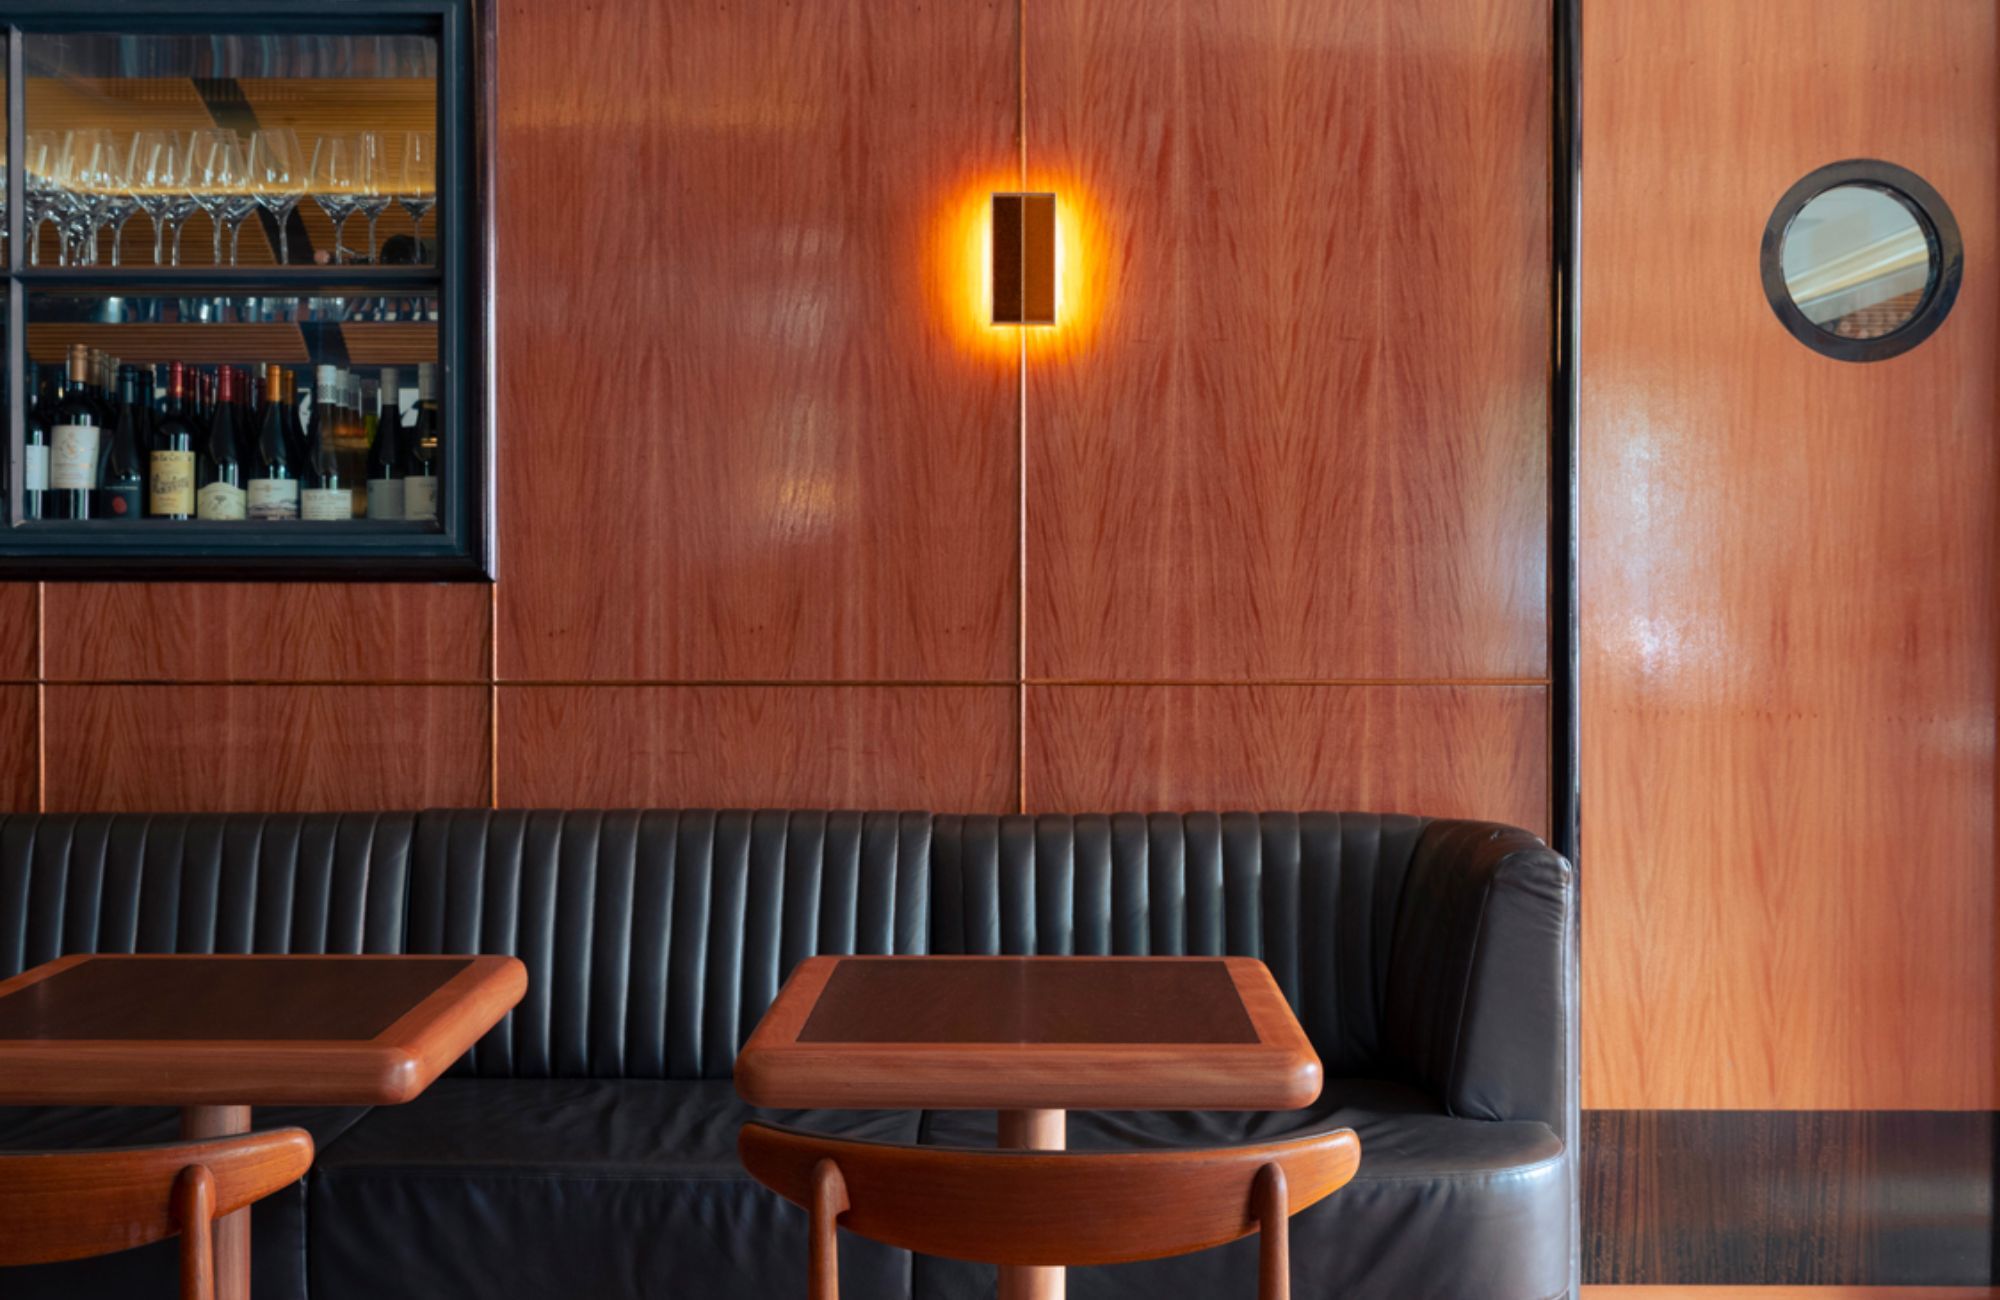 Woollahra Hotel by Richards Stanisich showing timber lined wall and leather booth seat